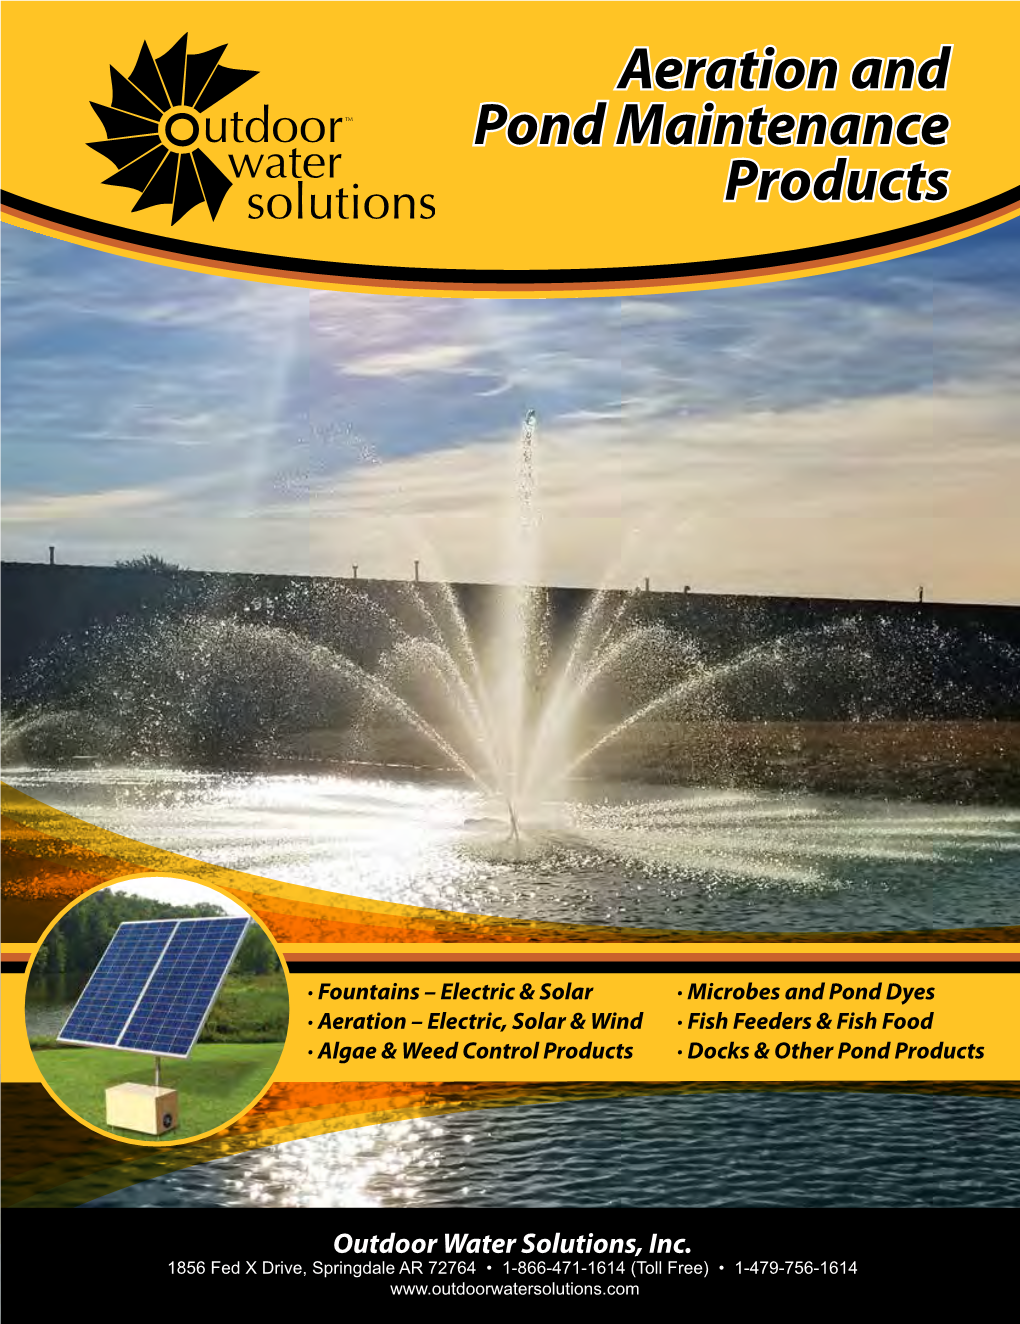 Aeration and Pond Maintenance Products